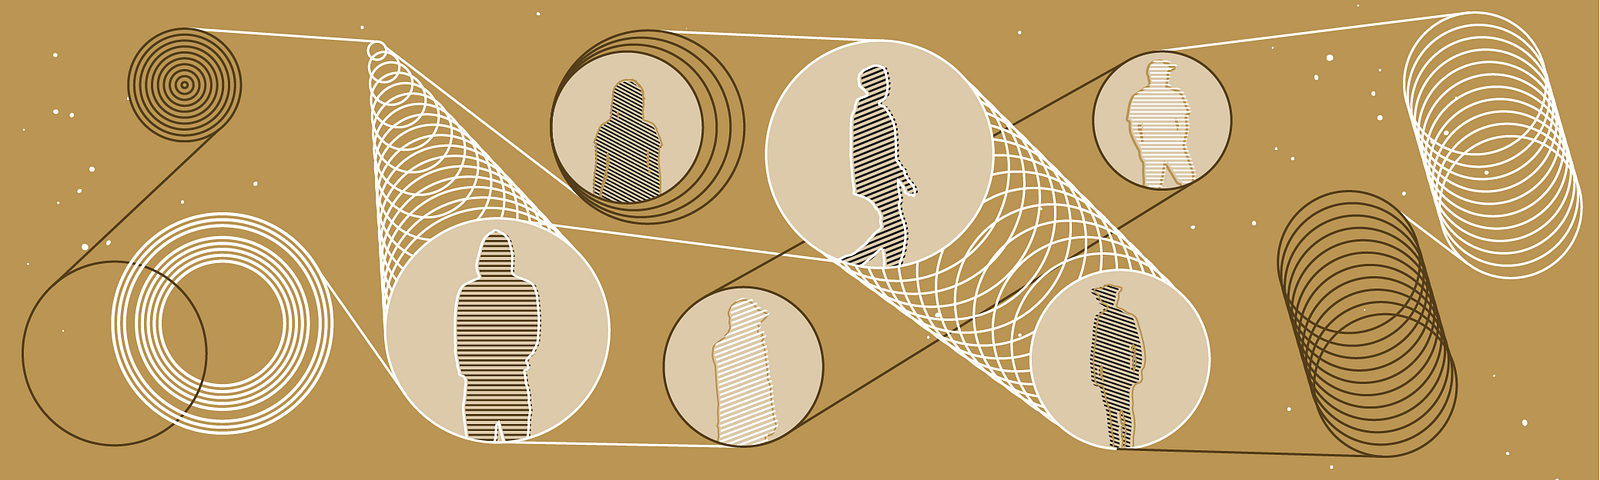 An abstract illustration of several individuals shown in profile connected in a complex network